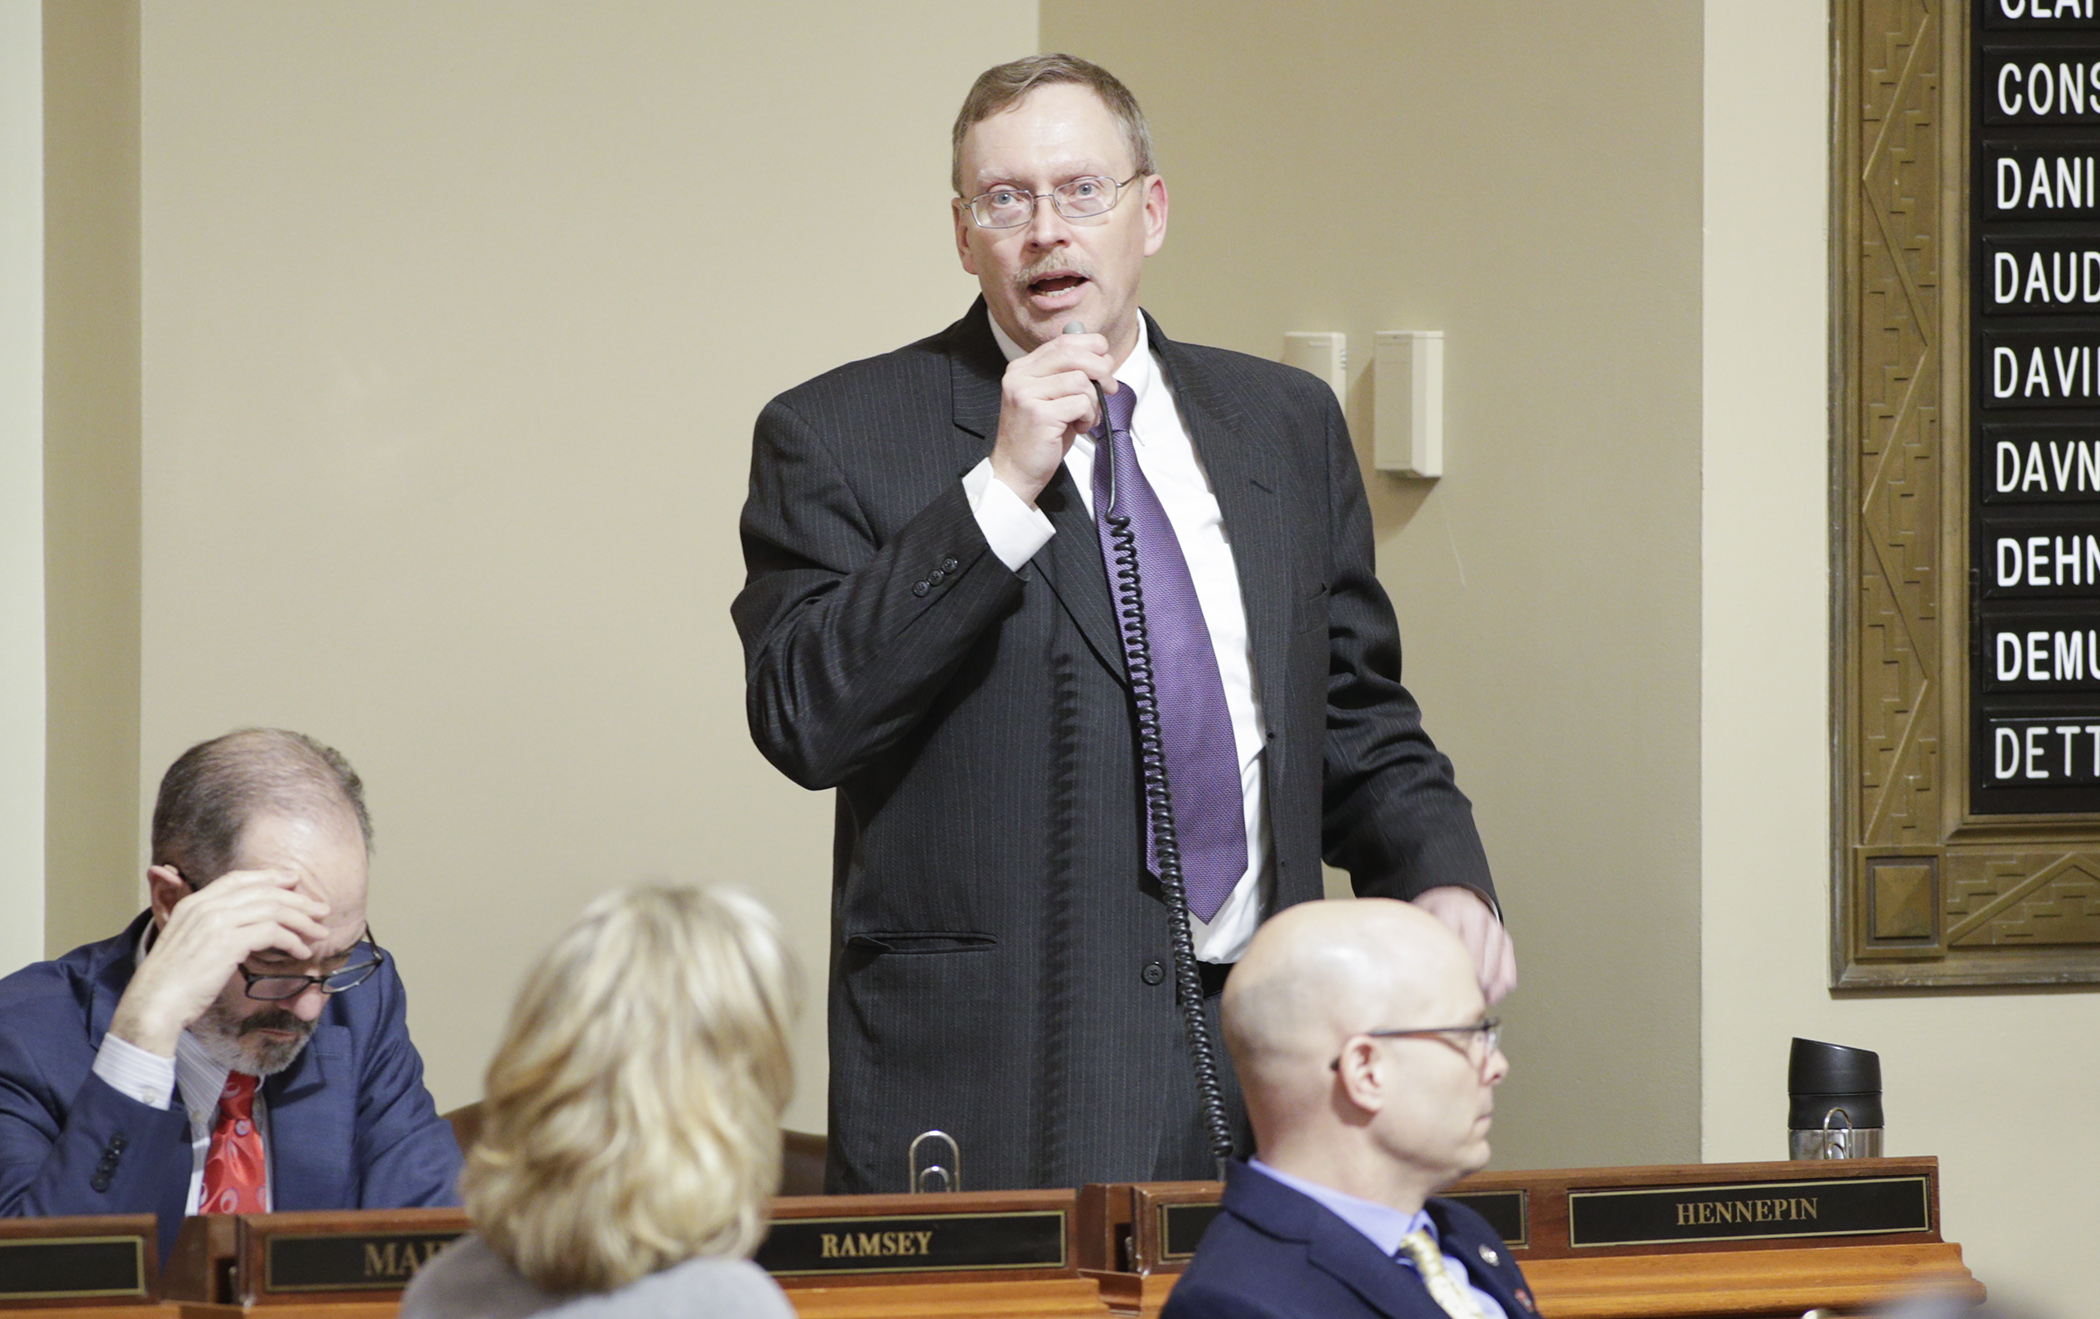 Rep. Michael Nelson describes his bill HF14, which would appropriate funds to the secretary of state to support efforts to secure elections infrastructure against cybersecurity threats, during floor debate Feb. 21. Photo by Paul Battaglia